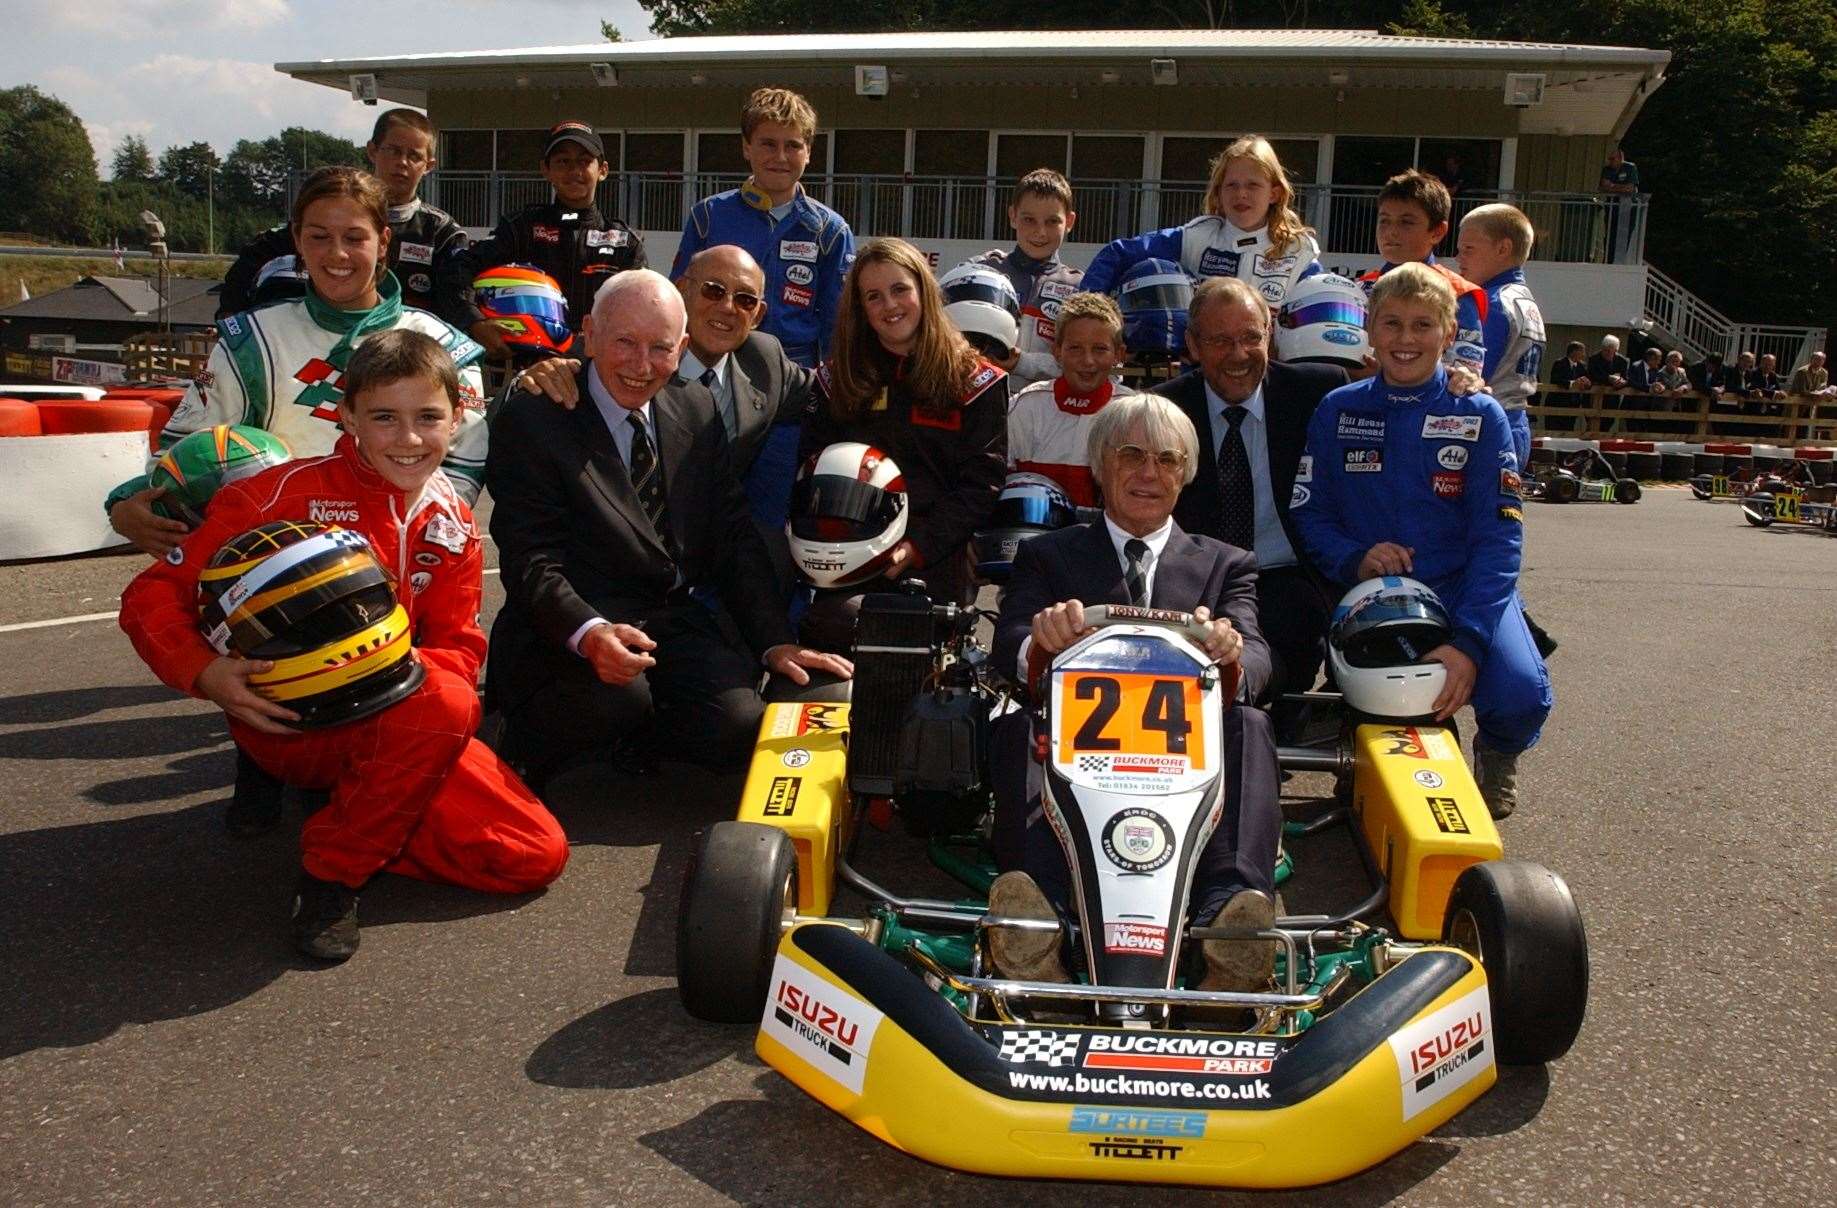 Ecclestone unveiled Buckmore's state-of-the-art clubhouse in 2003. "Buckmore Park is where I'd be racing if I was 10 years old again," he said. "I might try and persuade my daughter to sign up to race here." Picture: Jim Rantell